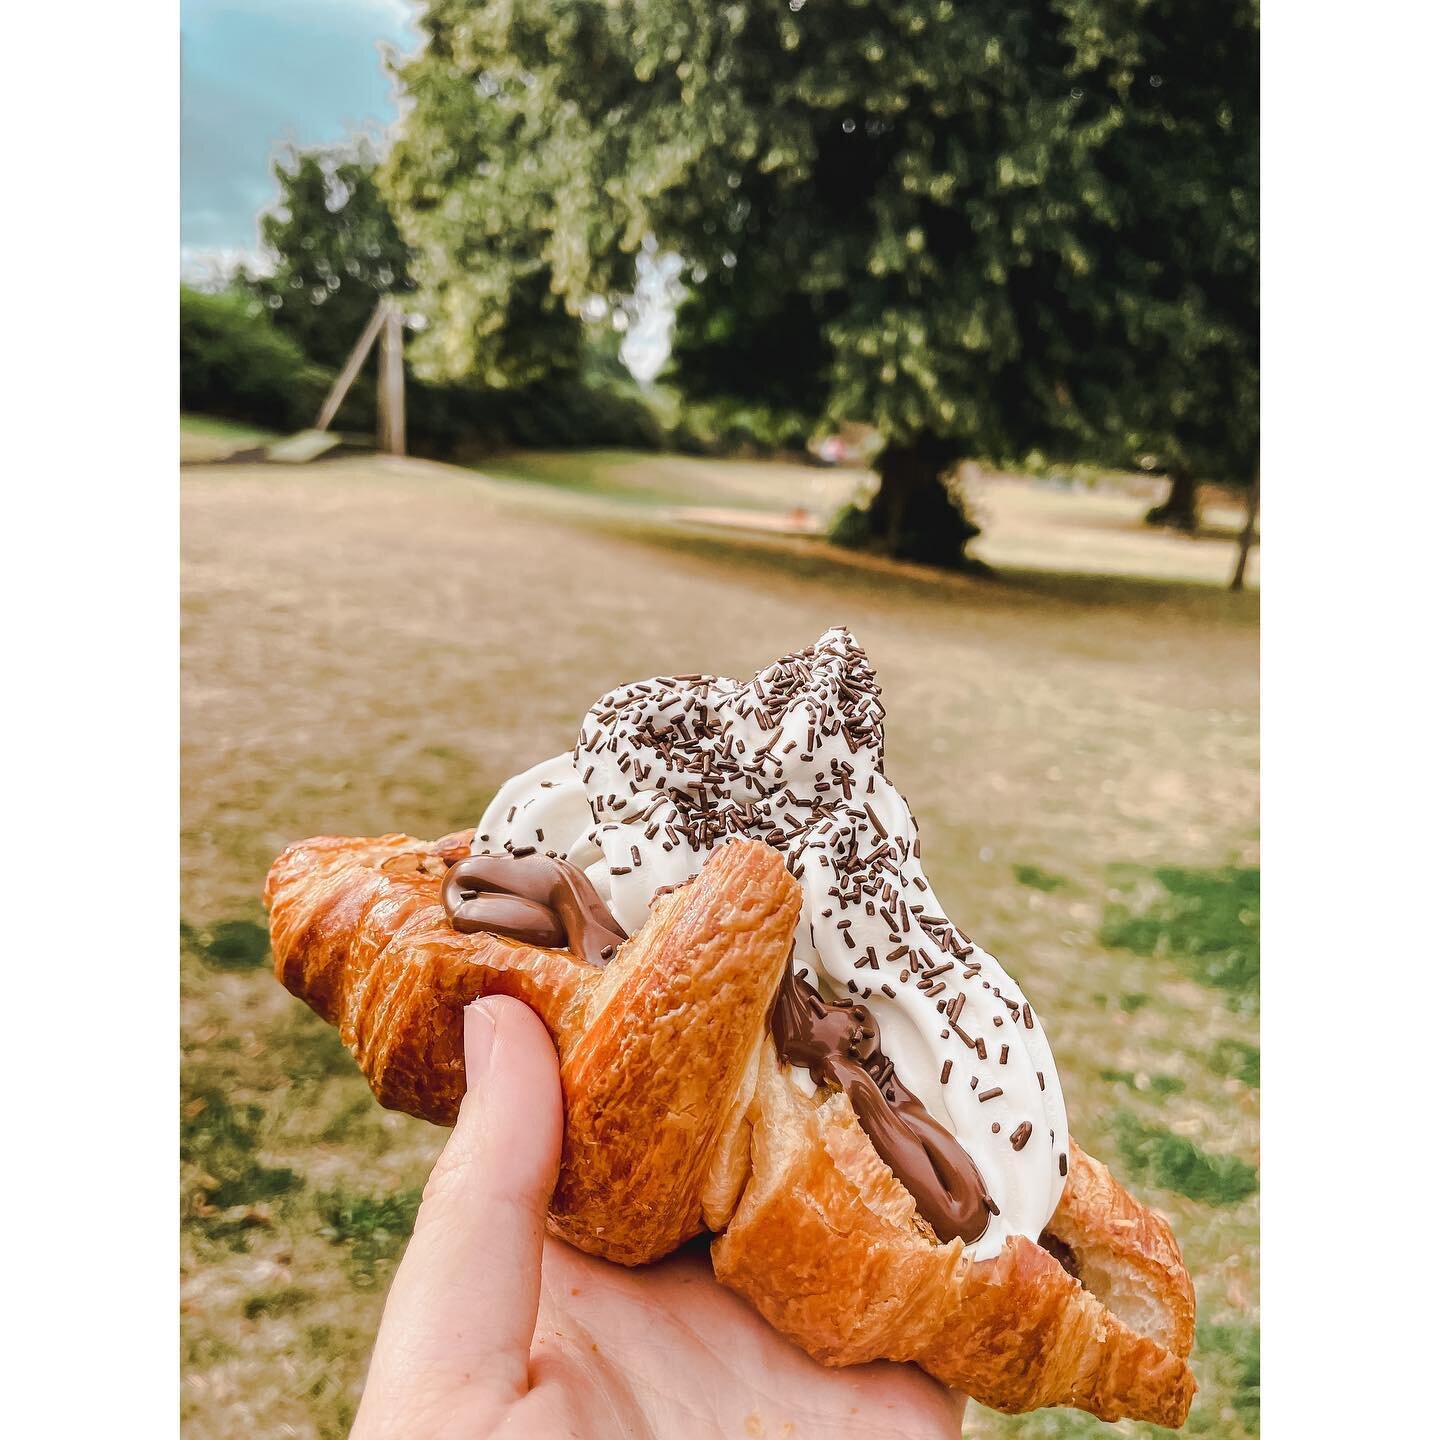 Tomorrow. We&rsquo;re going big for Eats &amp; Beats Festival. A freshly baked croissant, Jersey gold soft serve and lashings of Nutella; the best trio since Atomic Kitten. Still a few tickets left, don&rsquo;t miss out!